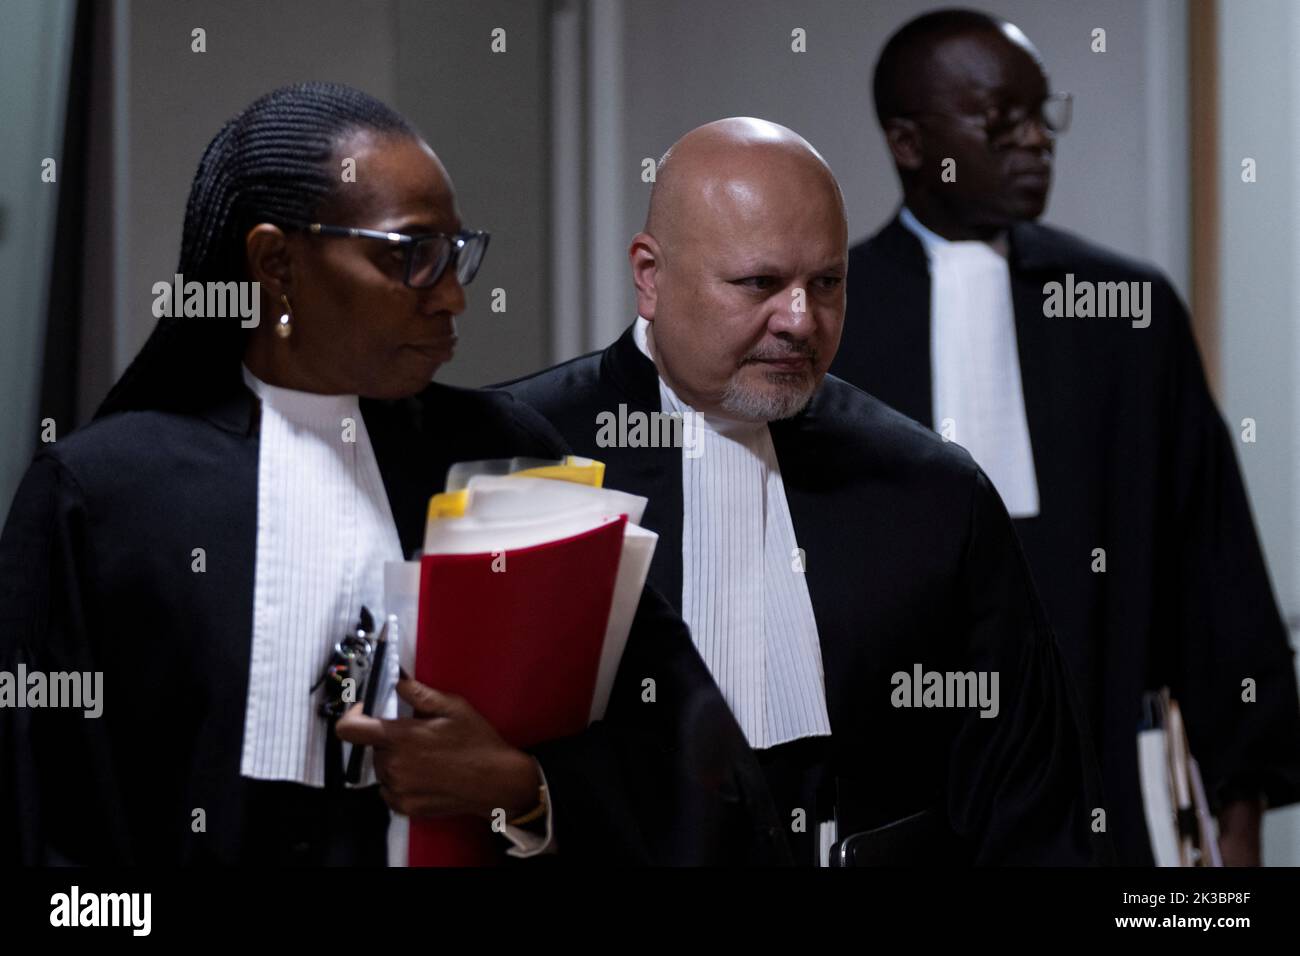 Public Prosecutor Karim Khan, centre, enters the court room for the trial of Mahamat Said Abdel Kani at the International Criminal Court in The Hague, Netherlands, Monday, Sept. 26, 2022. Peter Dejong/Pool via REUTERS Stock Photo